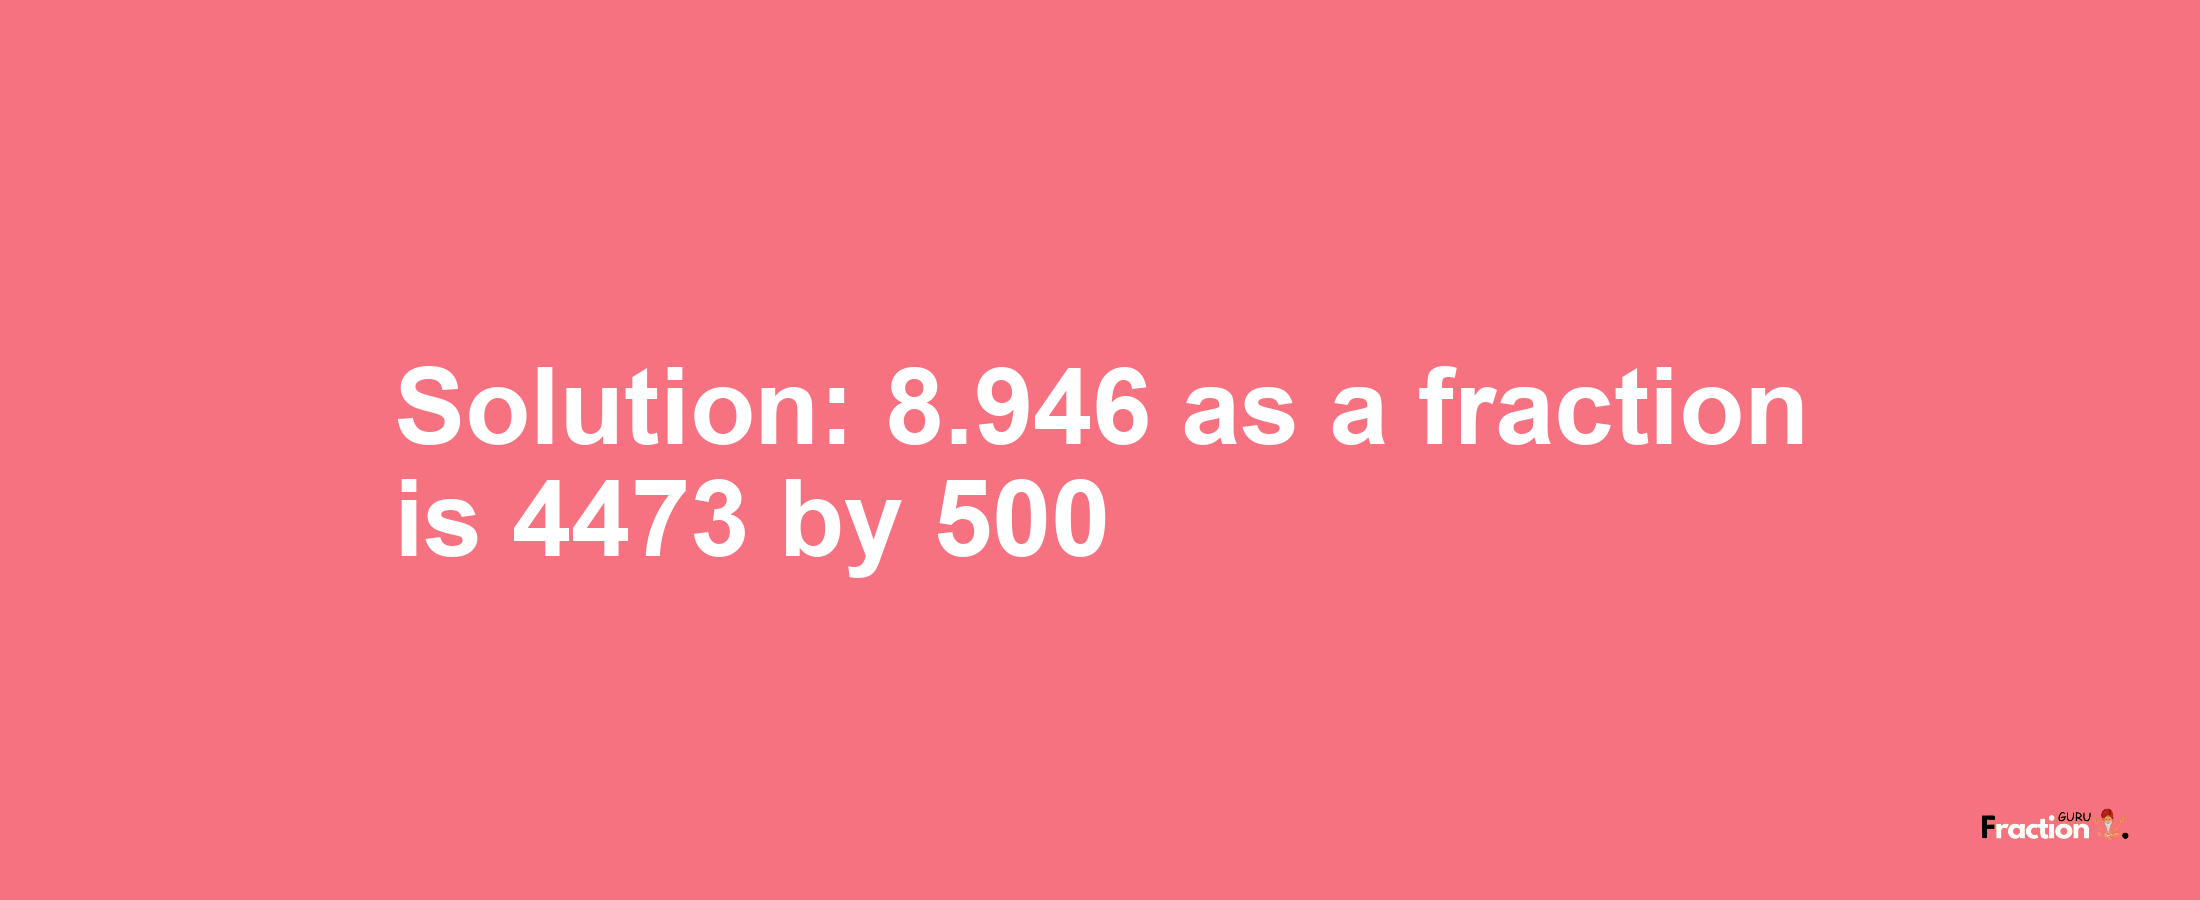 Solution:8.946 as a fraction is 4473/500